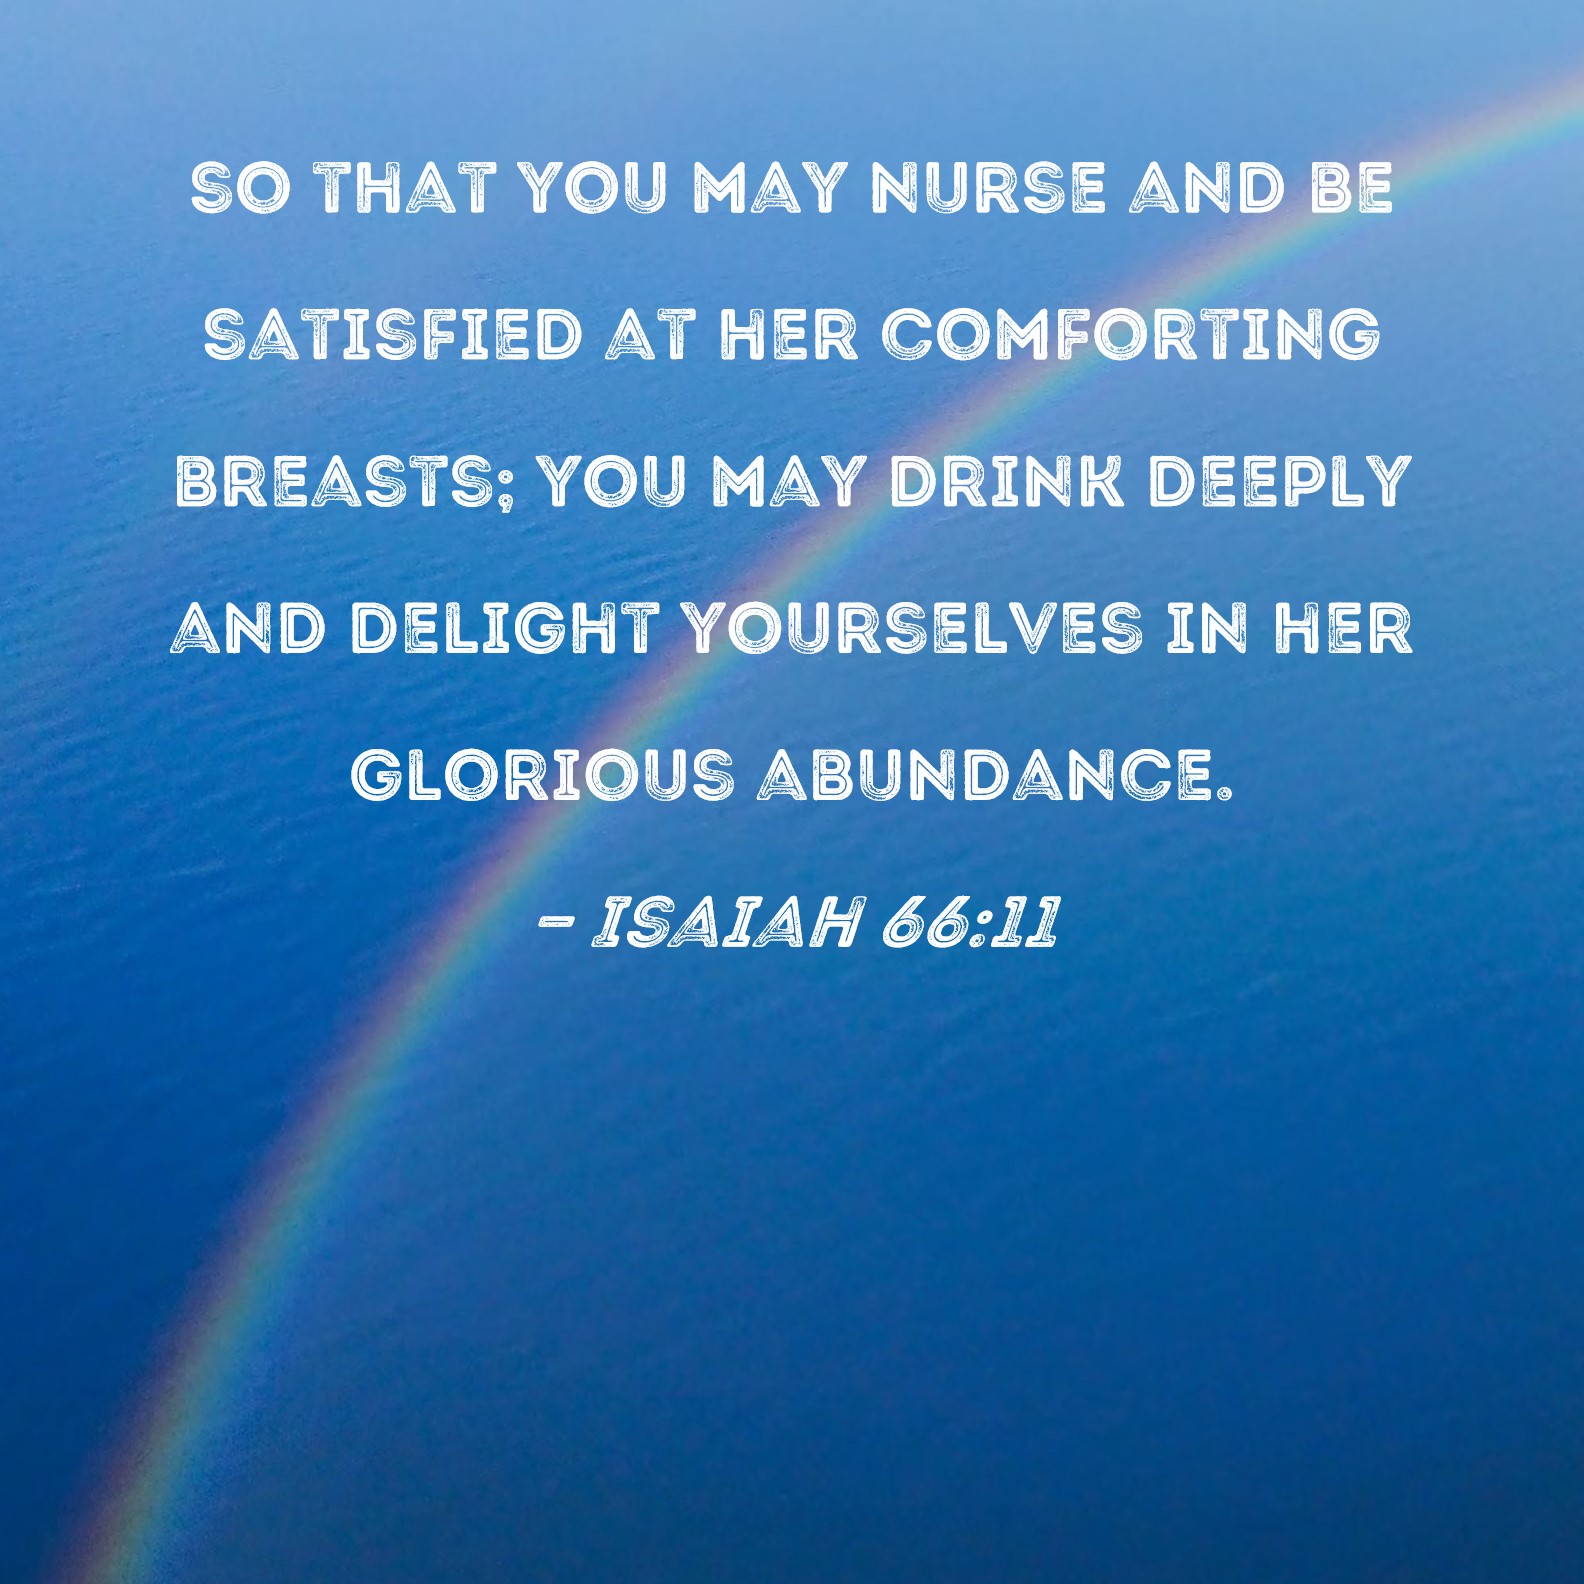 Isaiah 6611 so that you may nurse and be satisfied at her comforting breasts; you may drink deeply and delight yourselves in her glorious abundance.